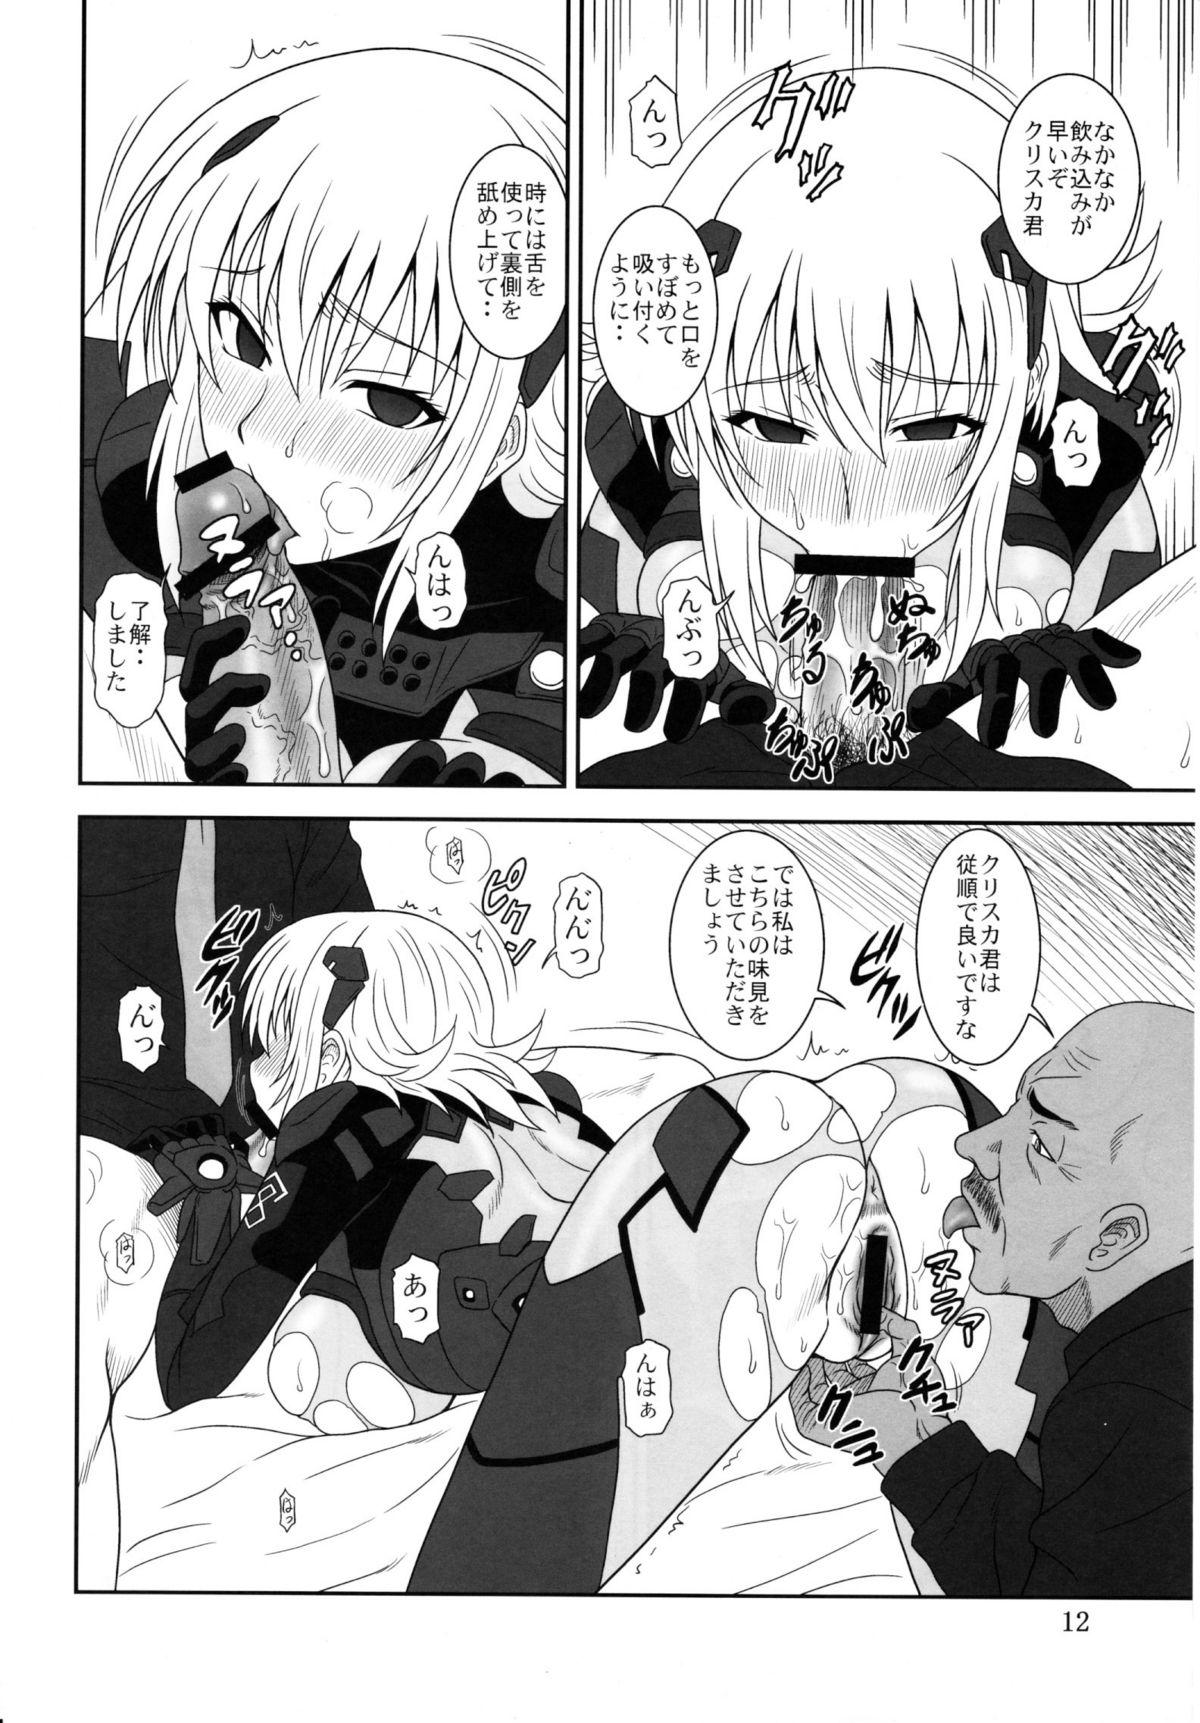 Cavalgando Tangential Episode 2 - Muv luv alternative total eclipse Shaved - Page 11